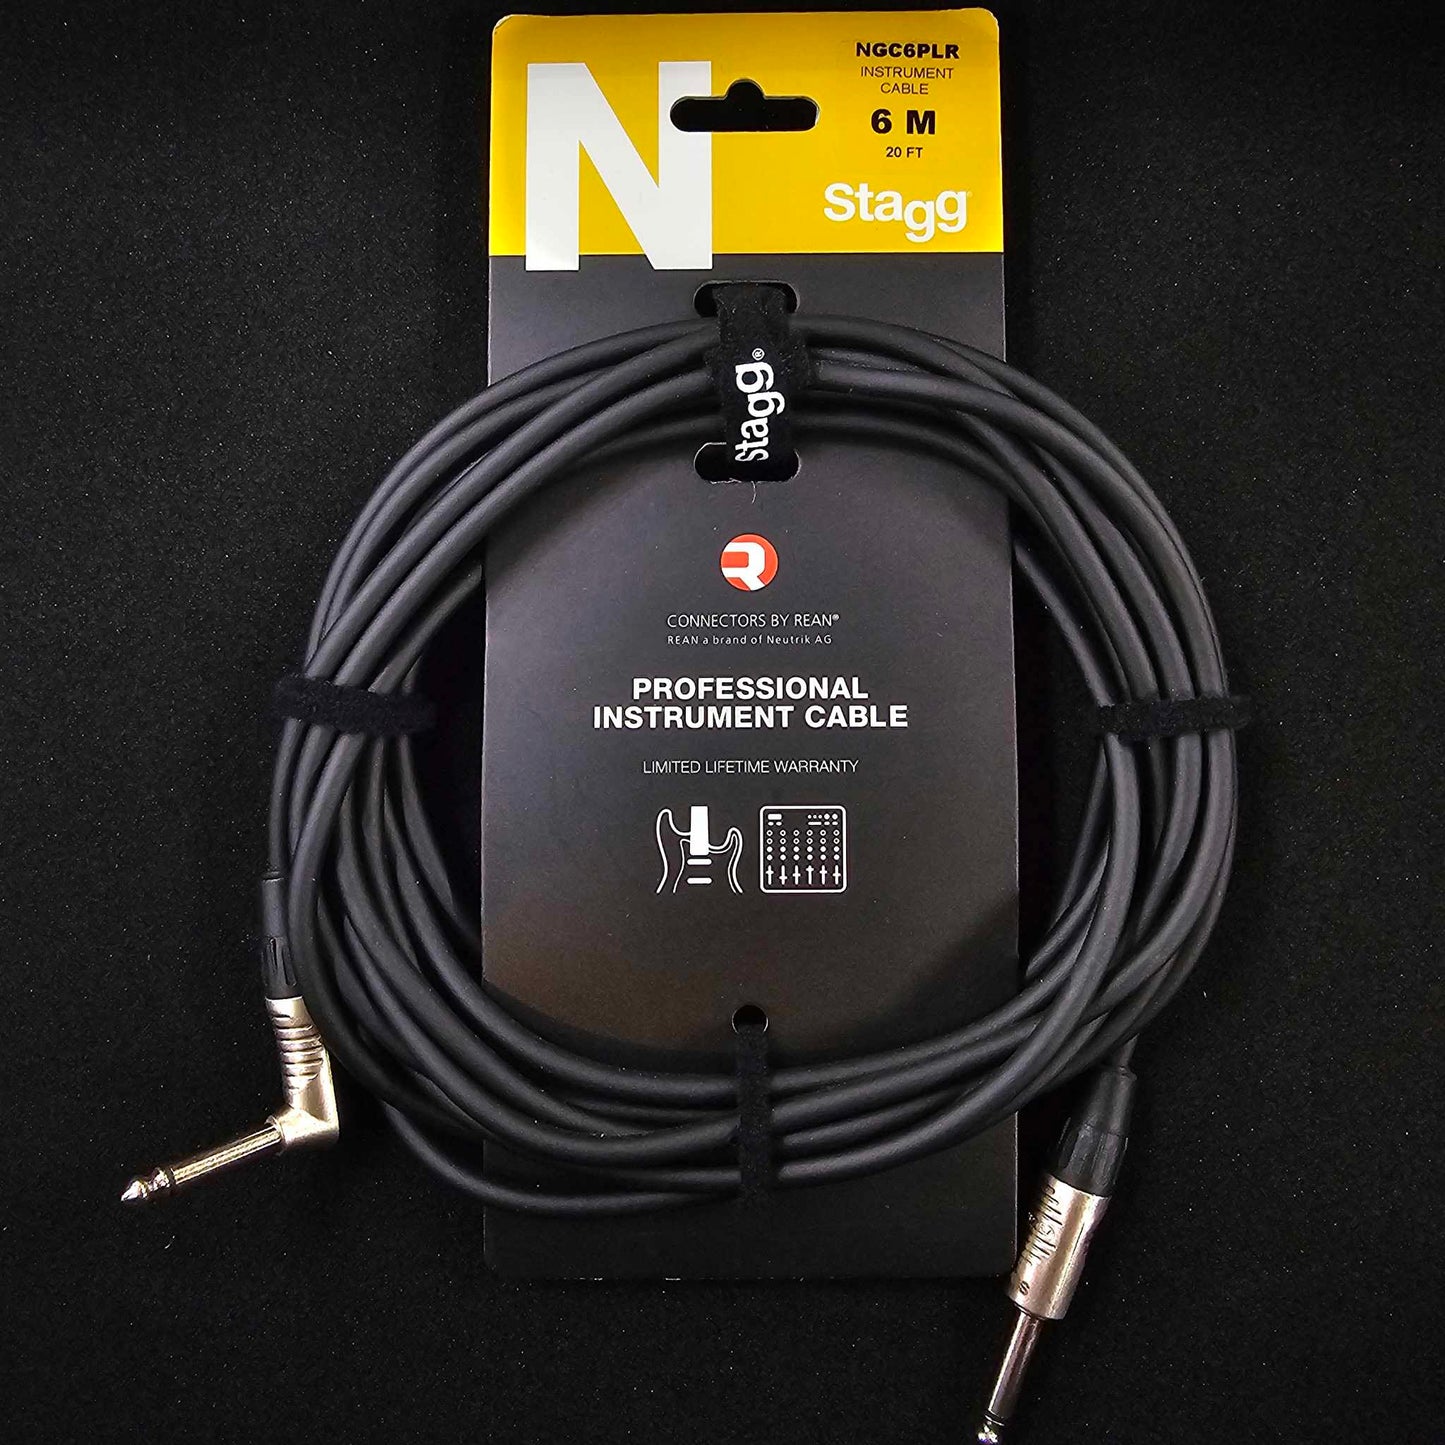 Stagg 20ft Professional Instrument Cable